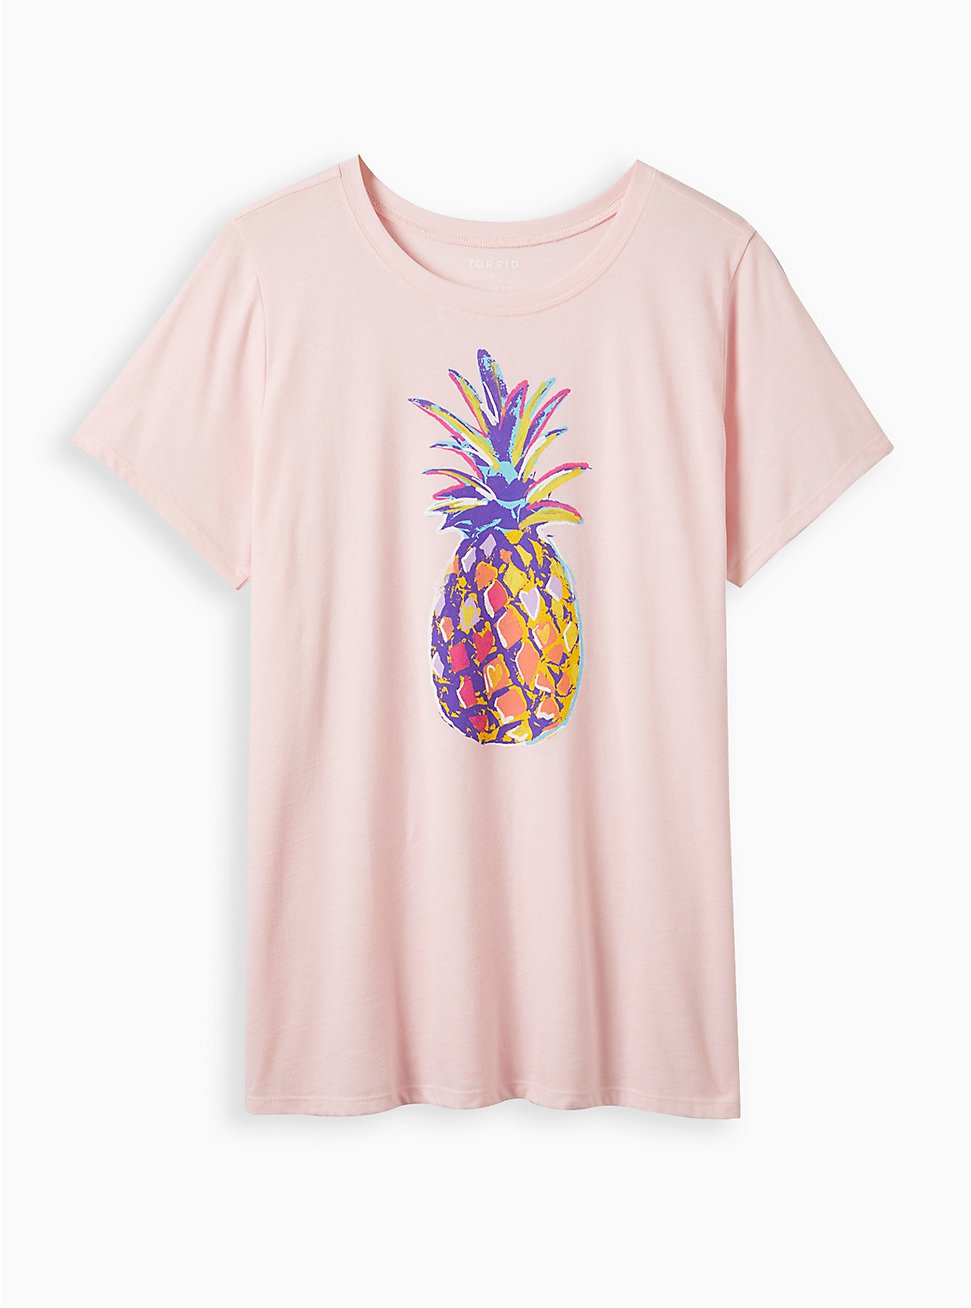 Plus Size Everyday Tee - Signature Jersey Pineapple Pink, ROSE SHADOW, hi-res